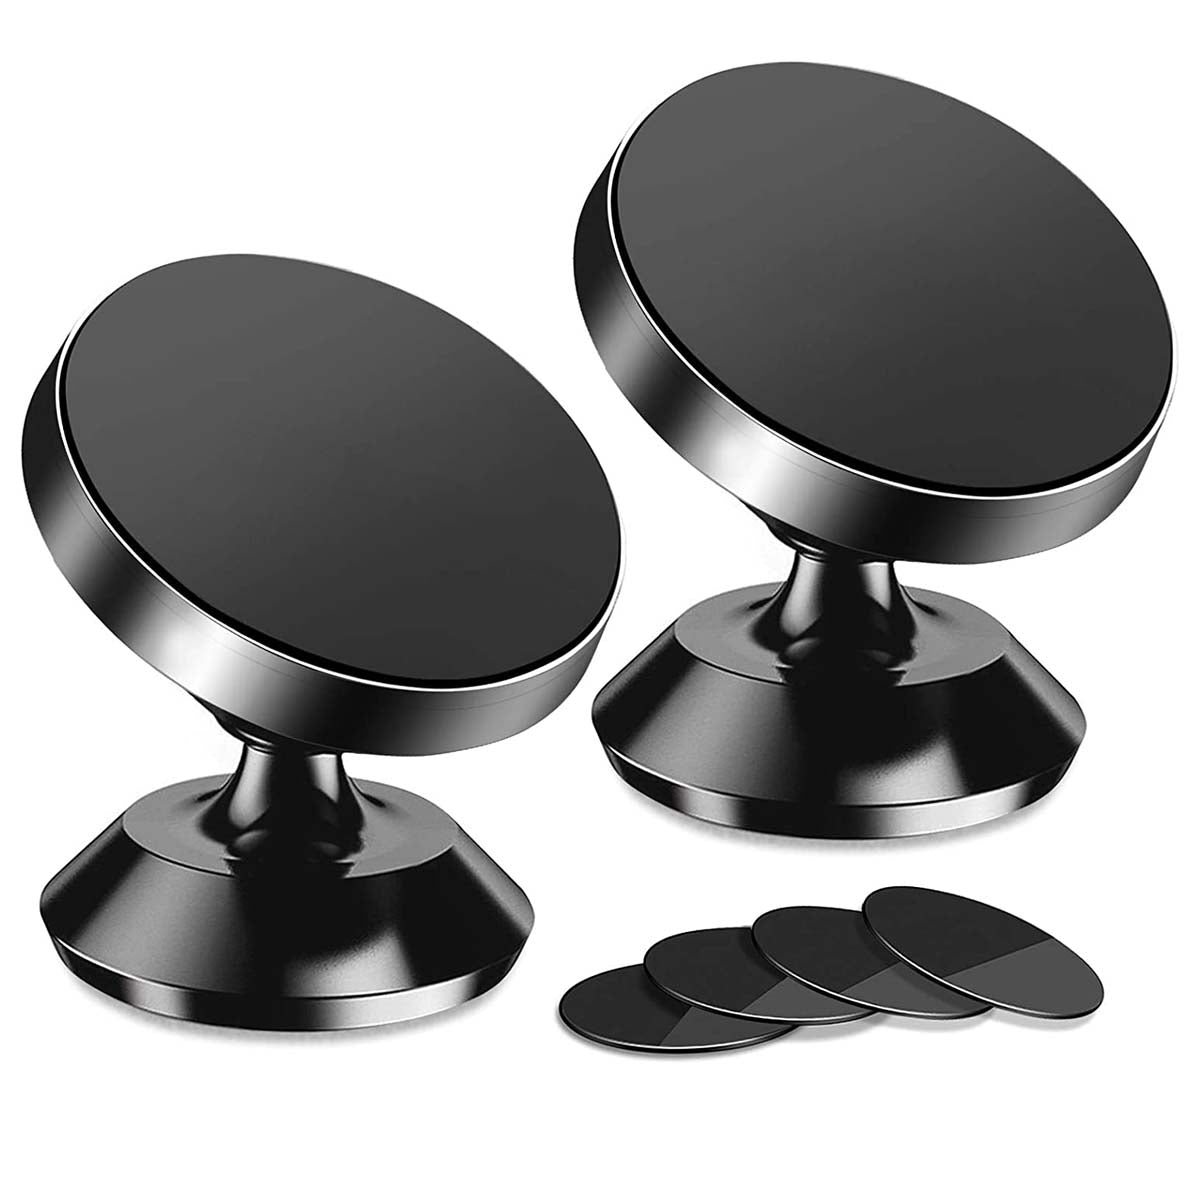 [2 Pack ] Magnetic Phone Mount, Custom For Cars, [ Super Strong Magnet ] [ with 4 Metal Plate ] car Magnetic Phone Holder, [ 360° Rotation ] Universal Dashboard car Mount Fits All Cell Phones, Car Accessories MS13982